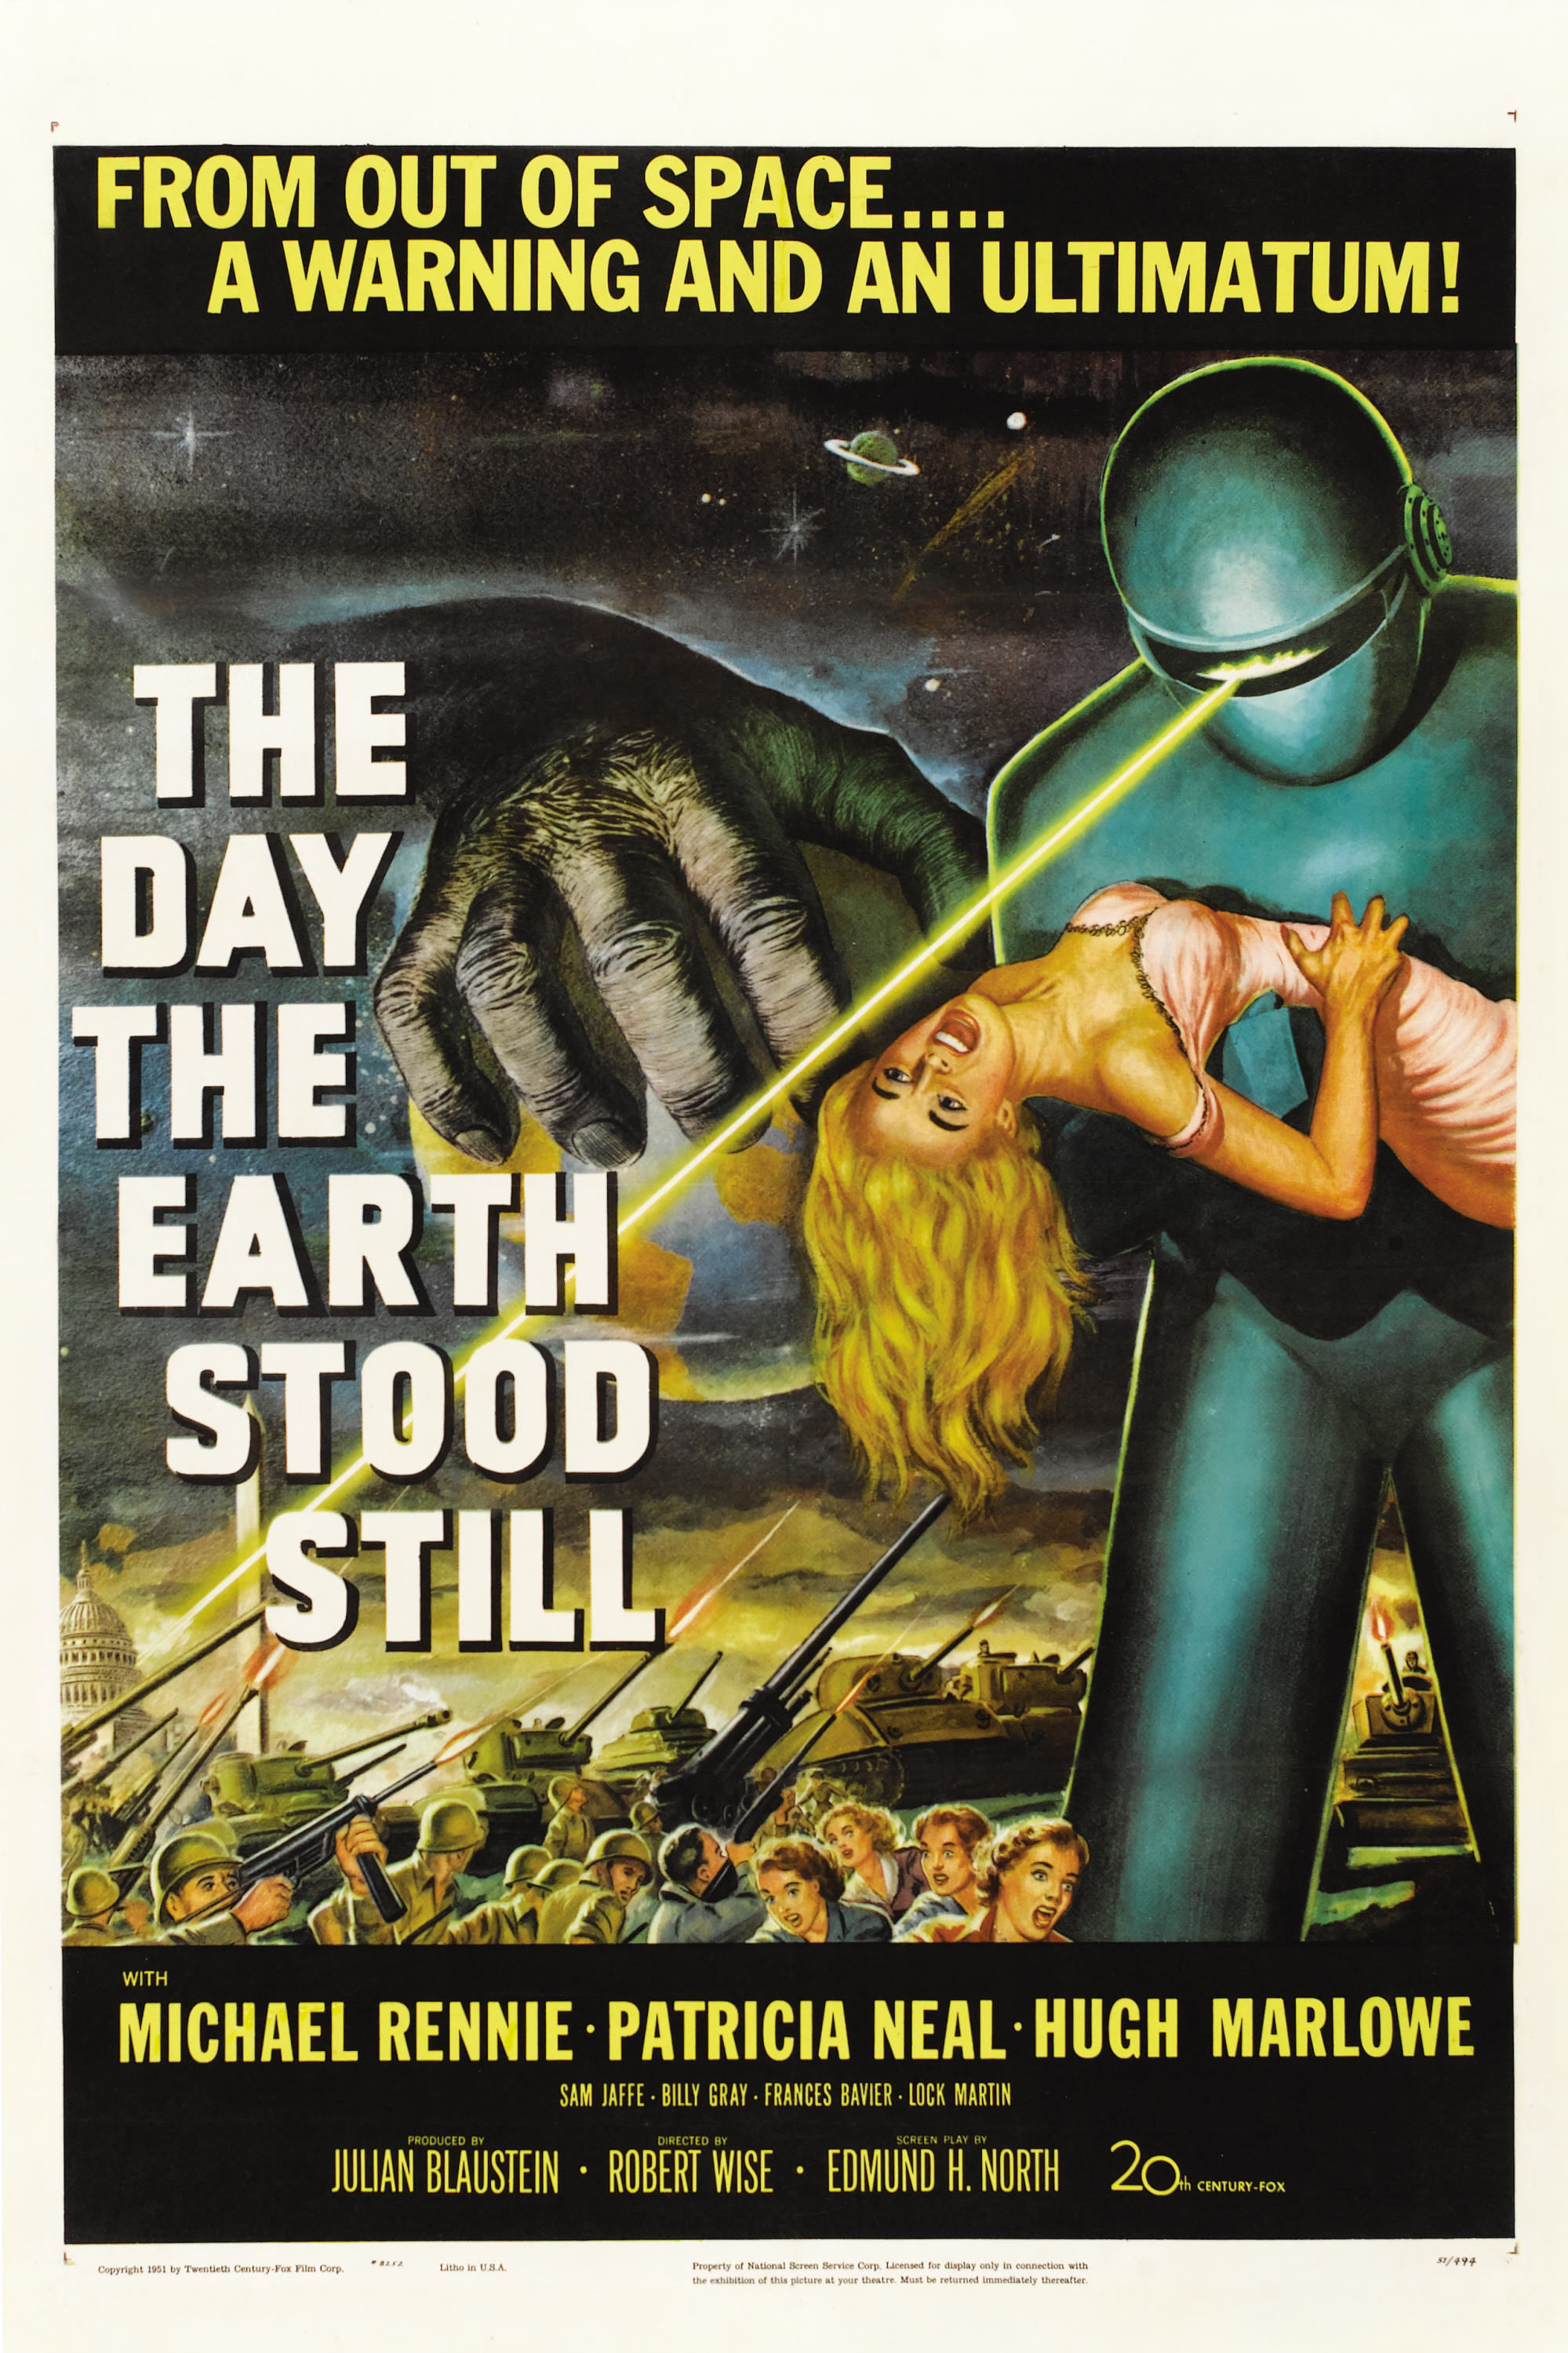 the day the earth stood still themes